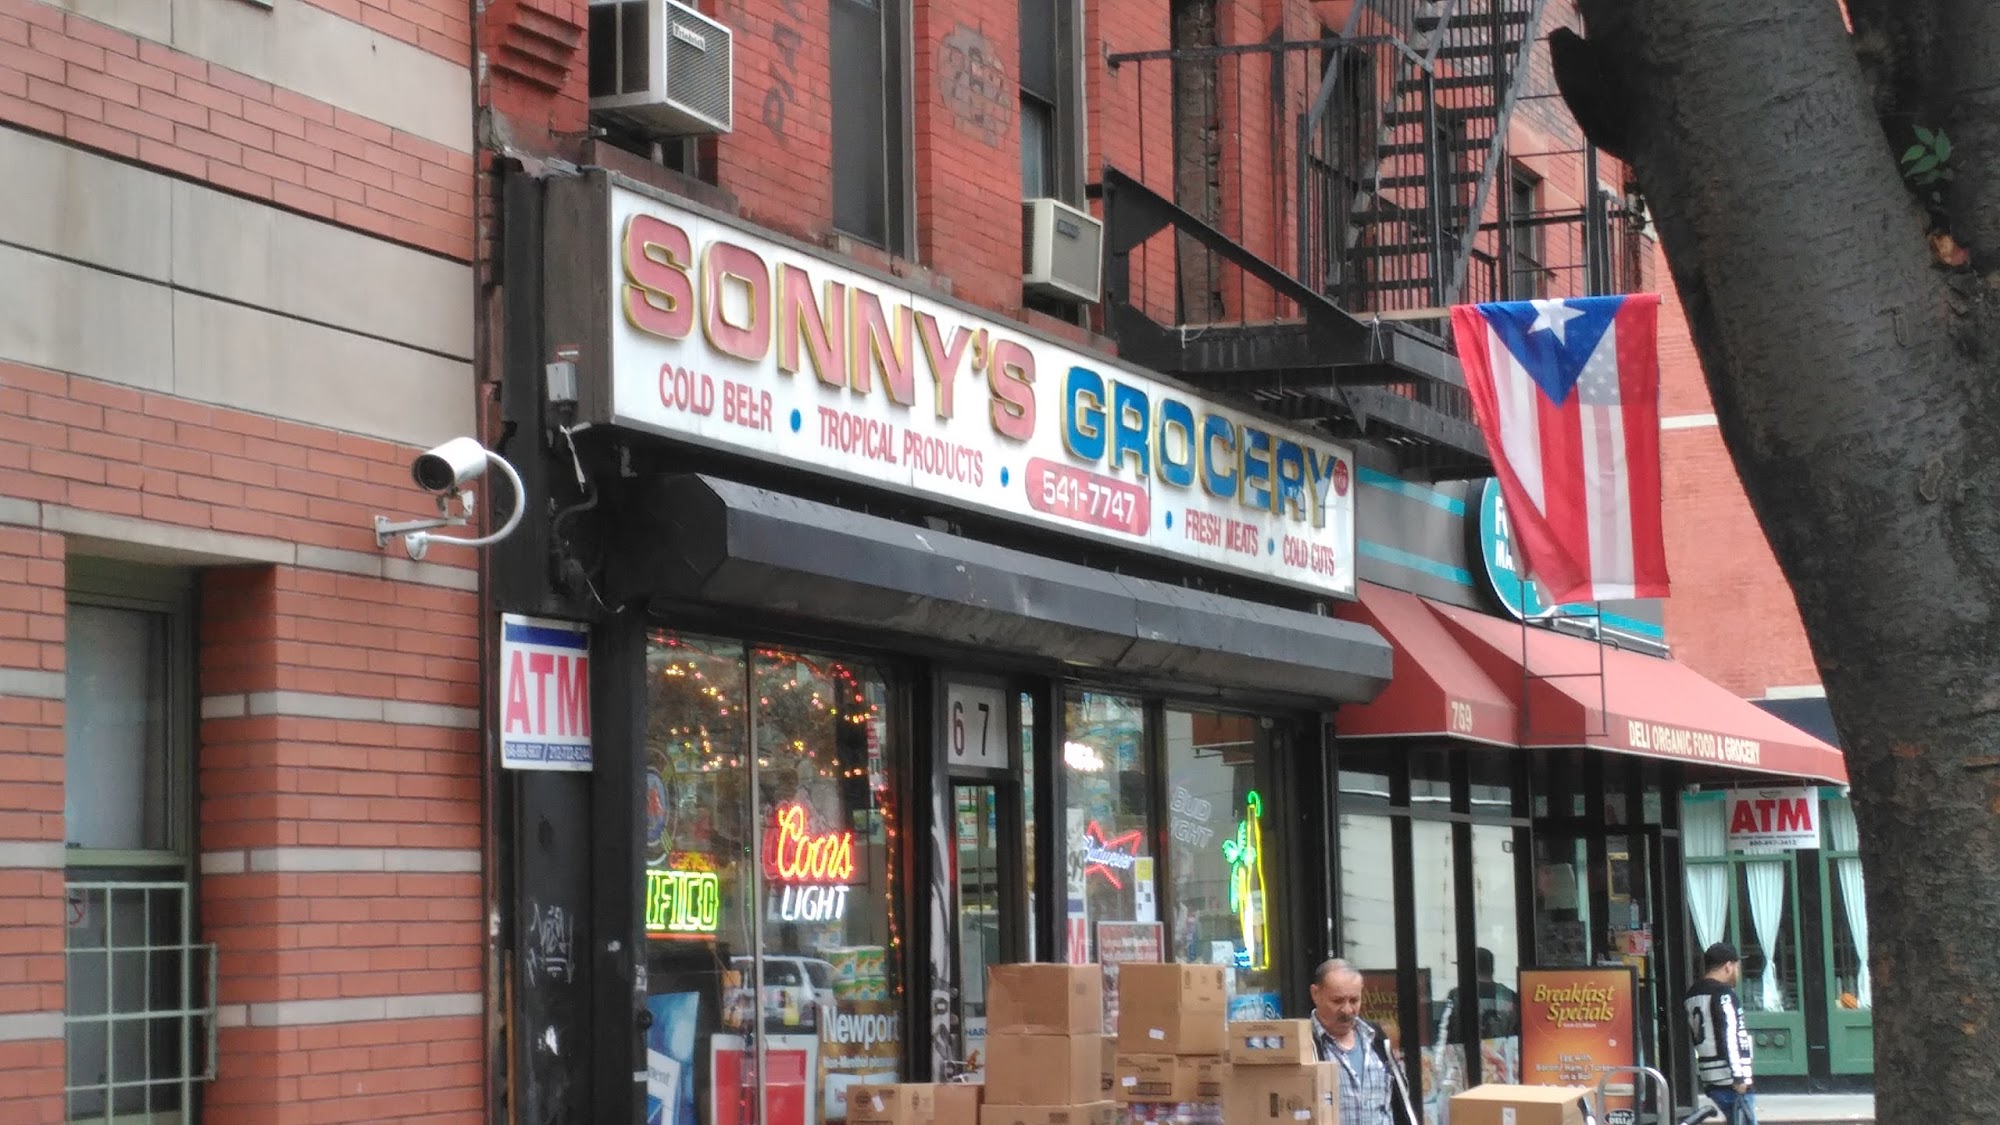 Sonny's Grocery store